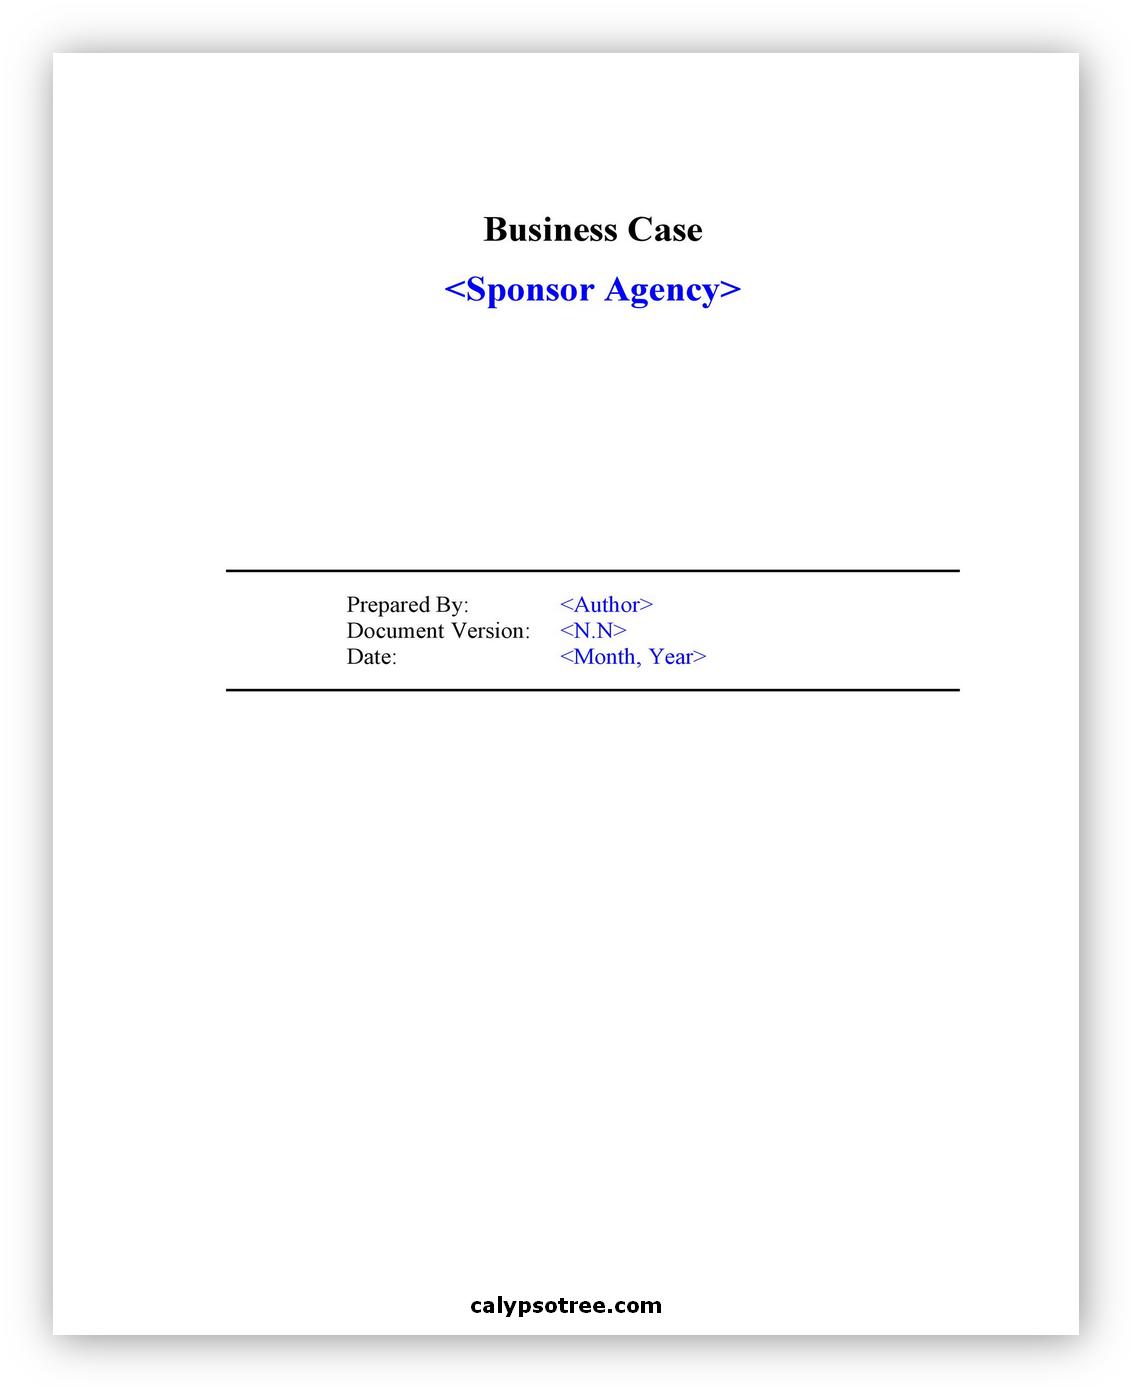 Business Case Example 03